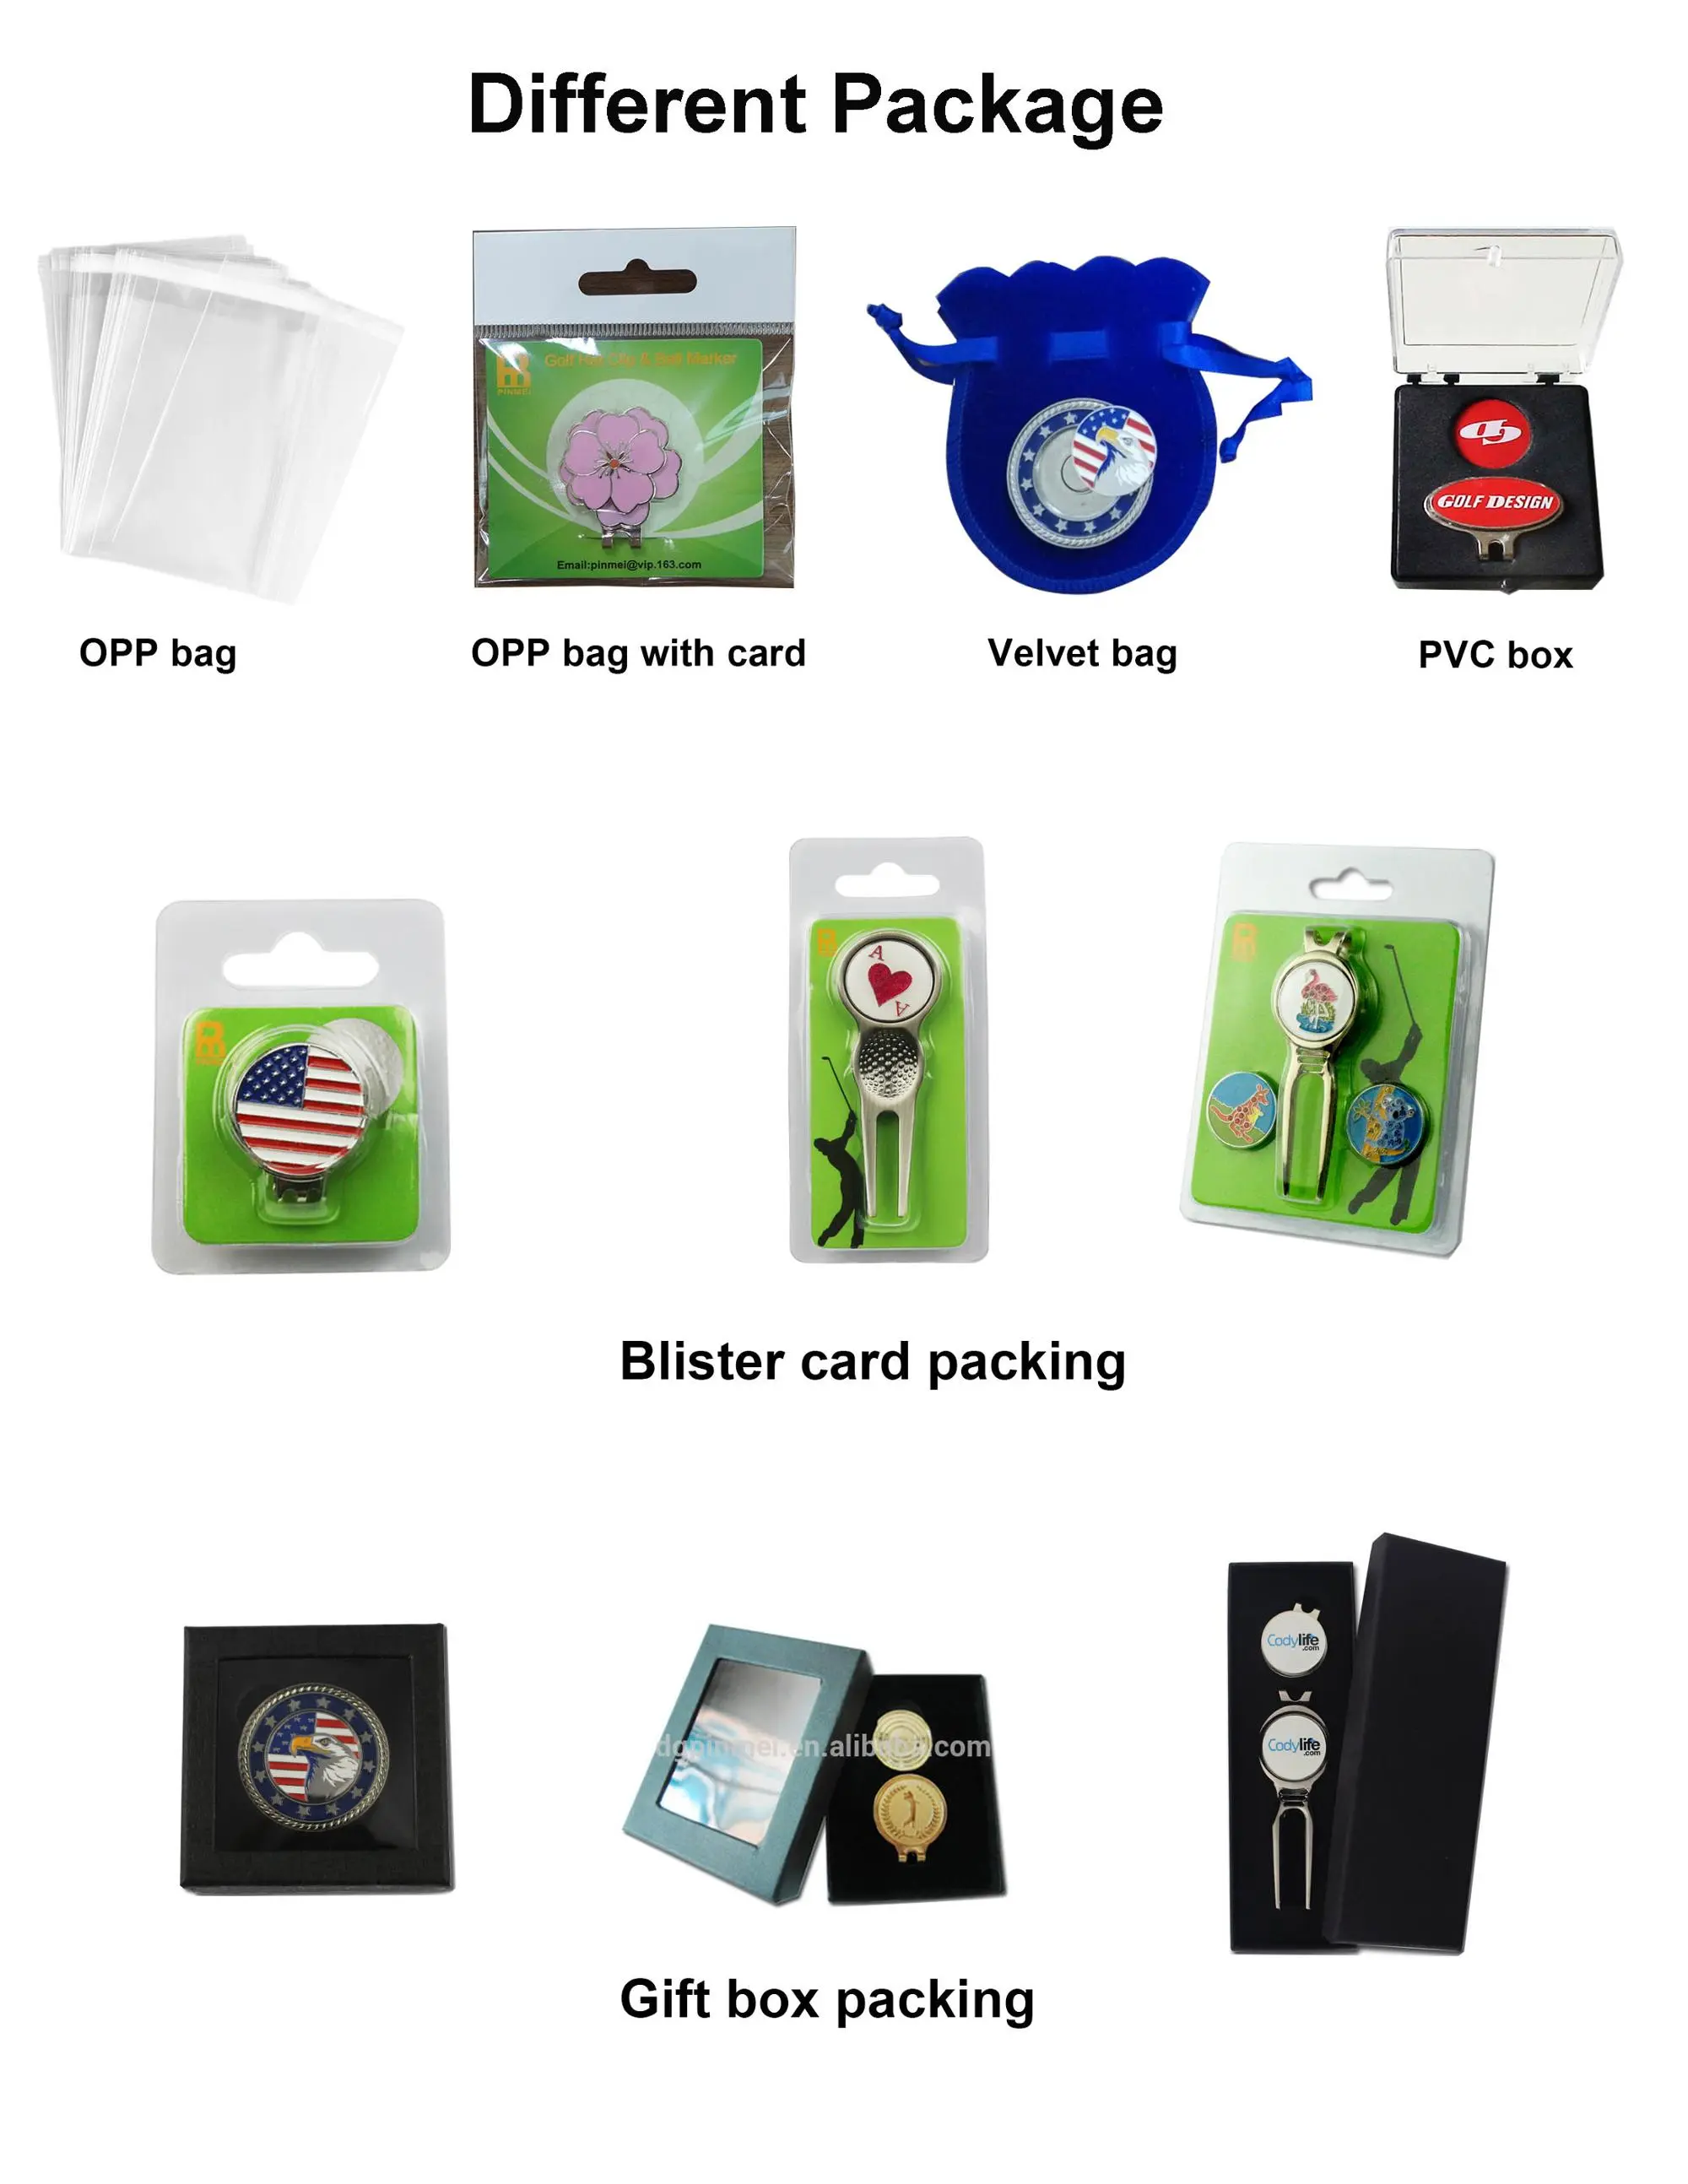 Bulk golf magnetic hat clip with four smiley face ball marker